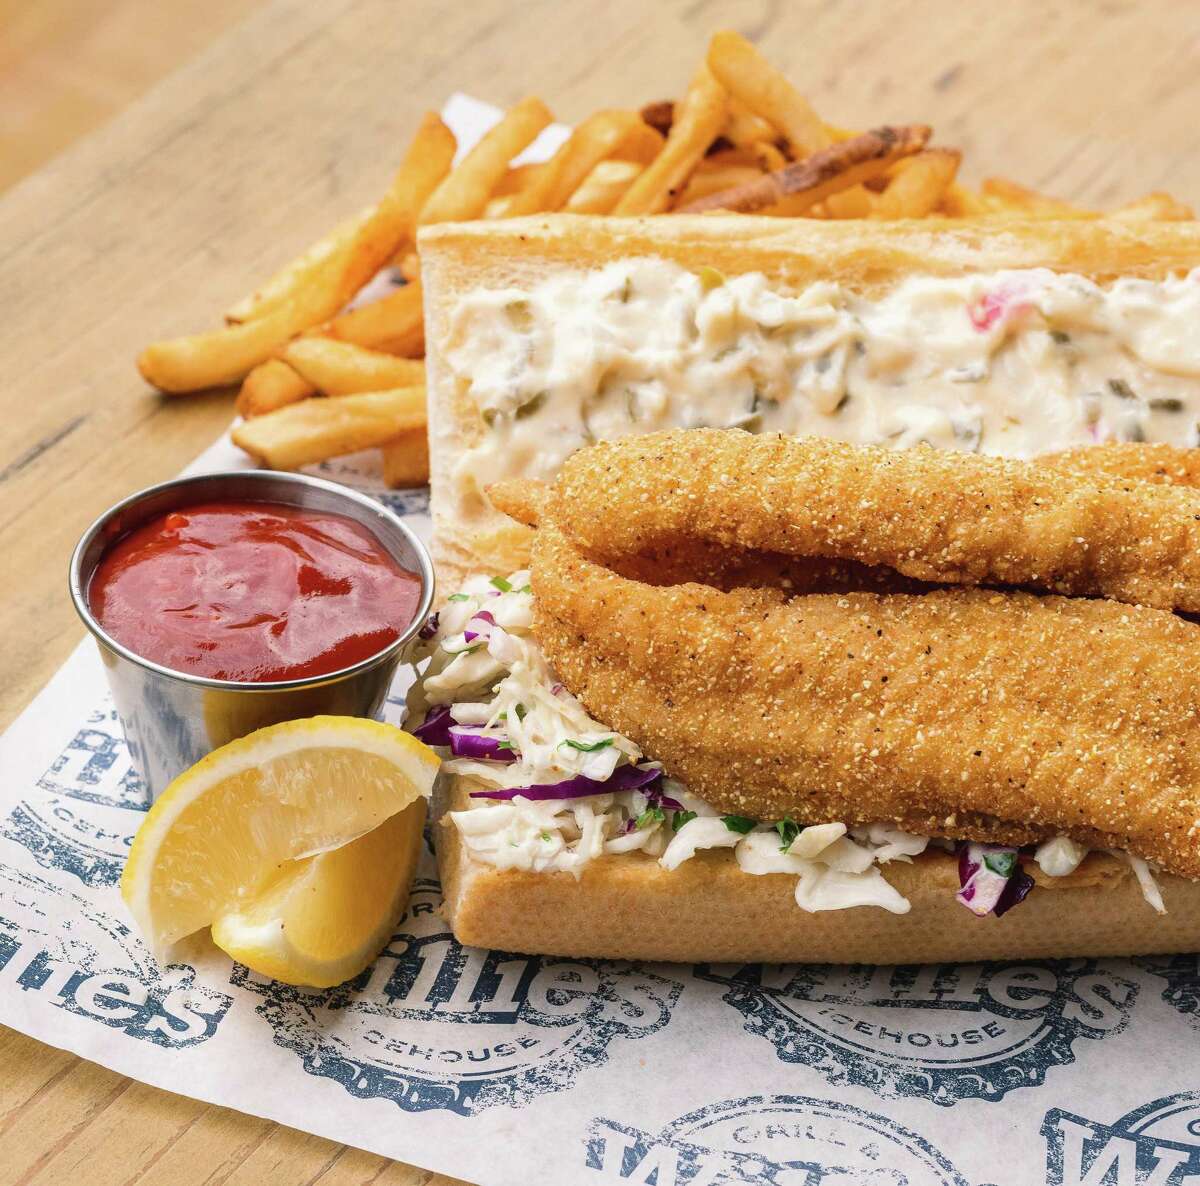 Catfish Po'boy (grilled, fried or blackened) served with fries, cole slaw and tartar sauce is a secret menu item at Willie's Grill & Icehouse.